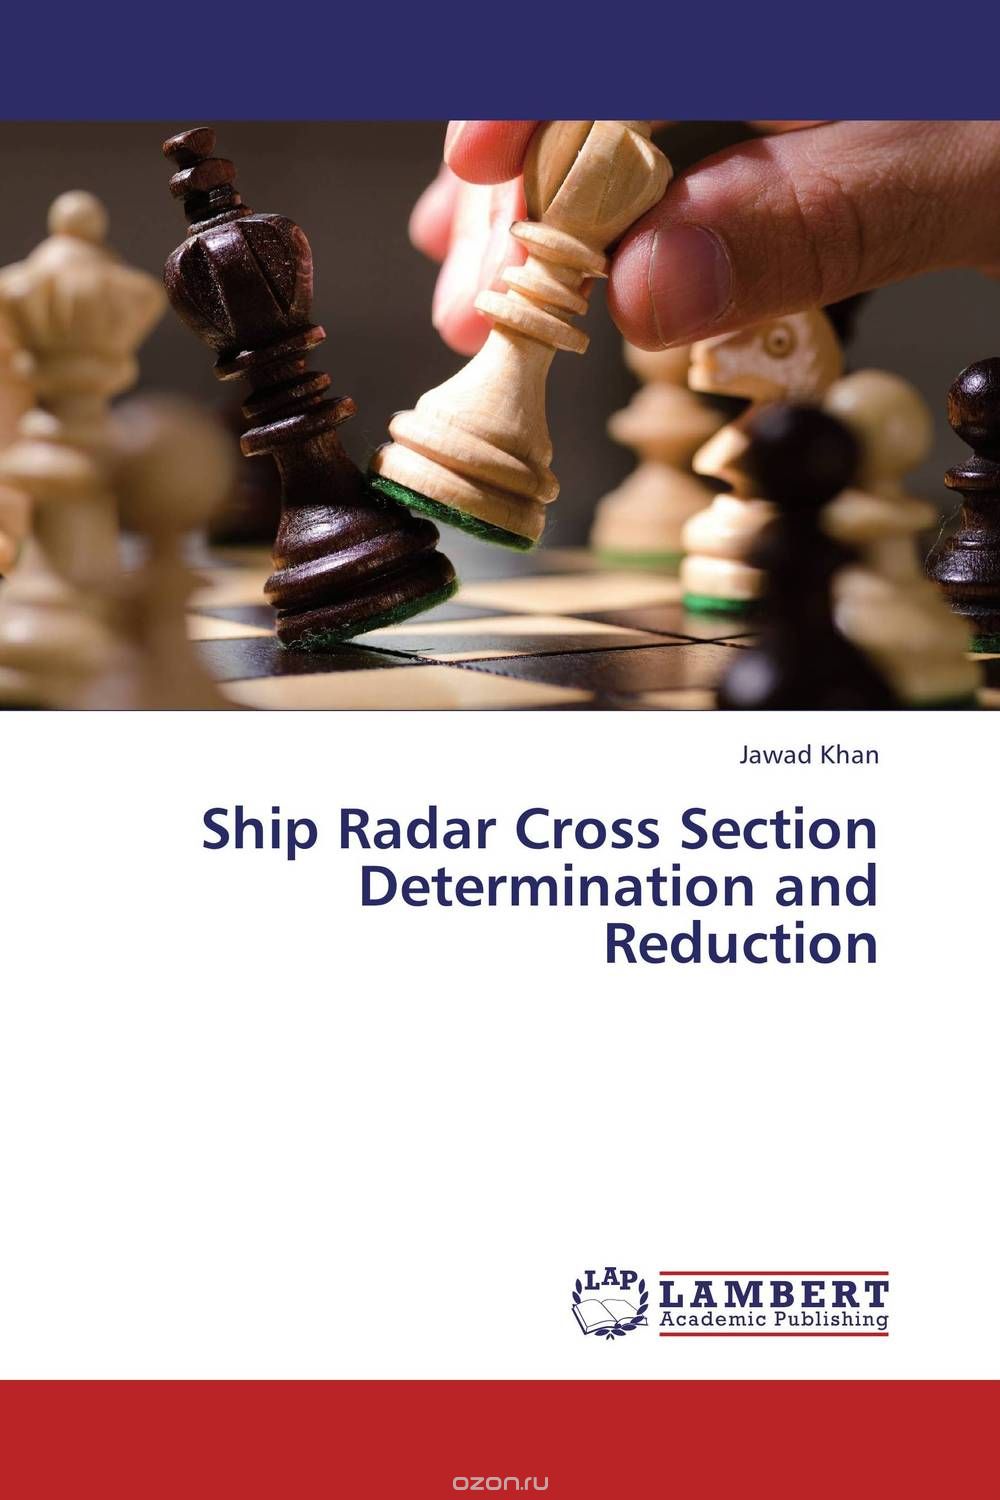 Ship Radar Cross Section Determination and Reduction